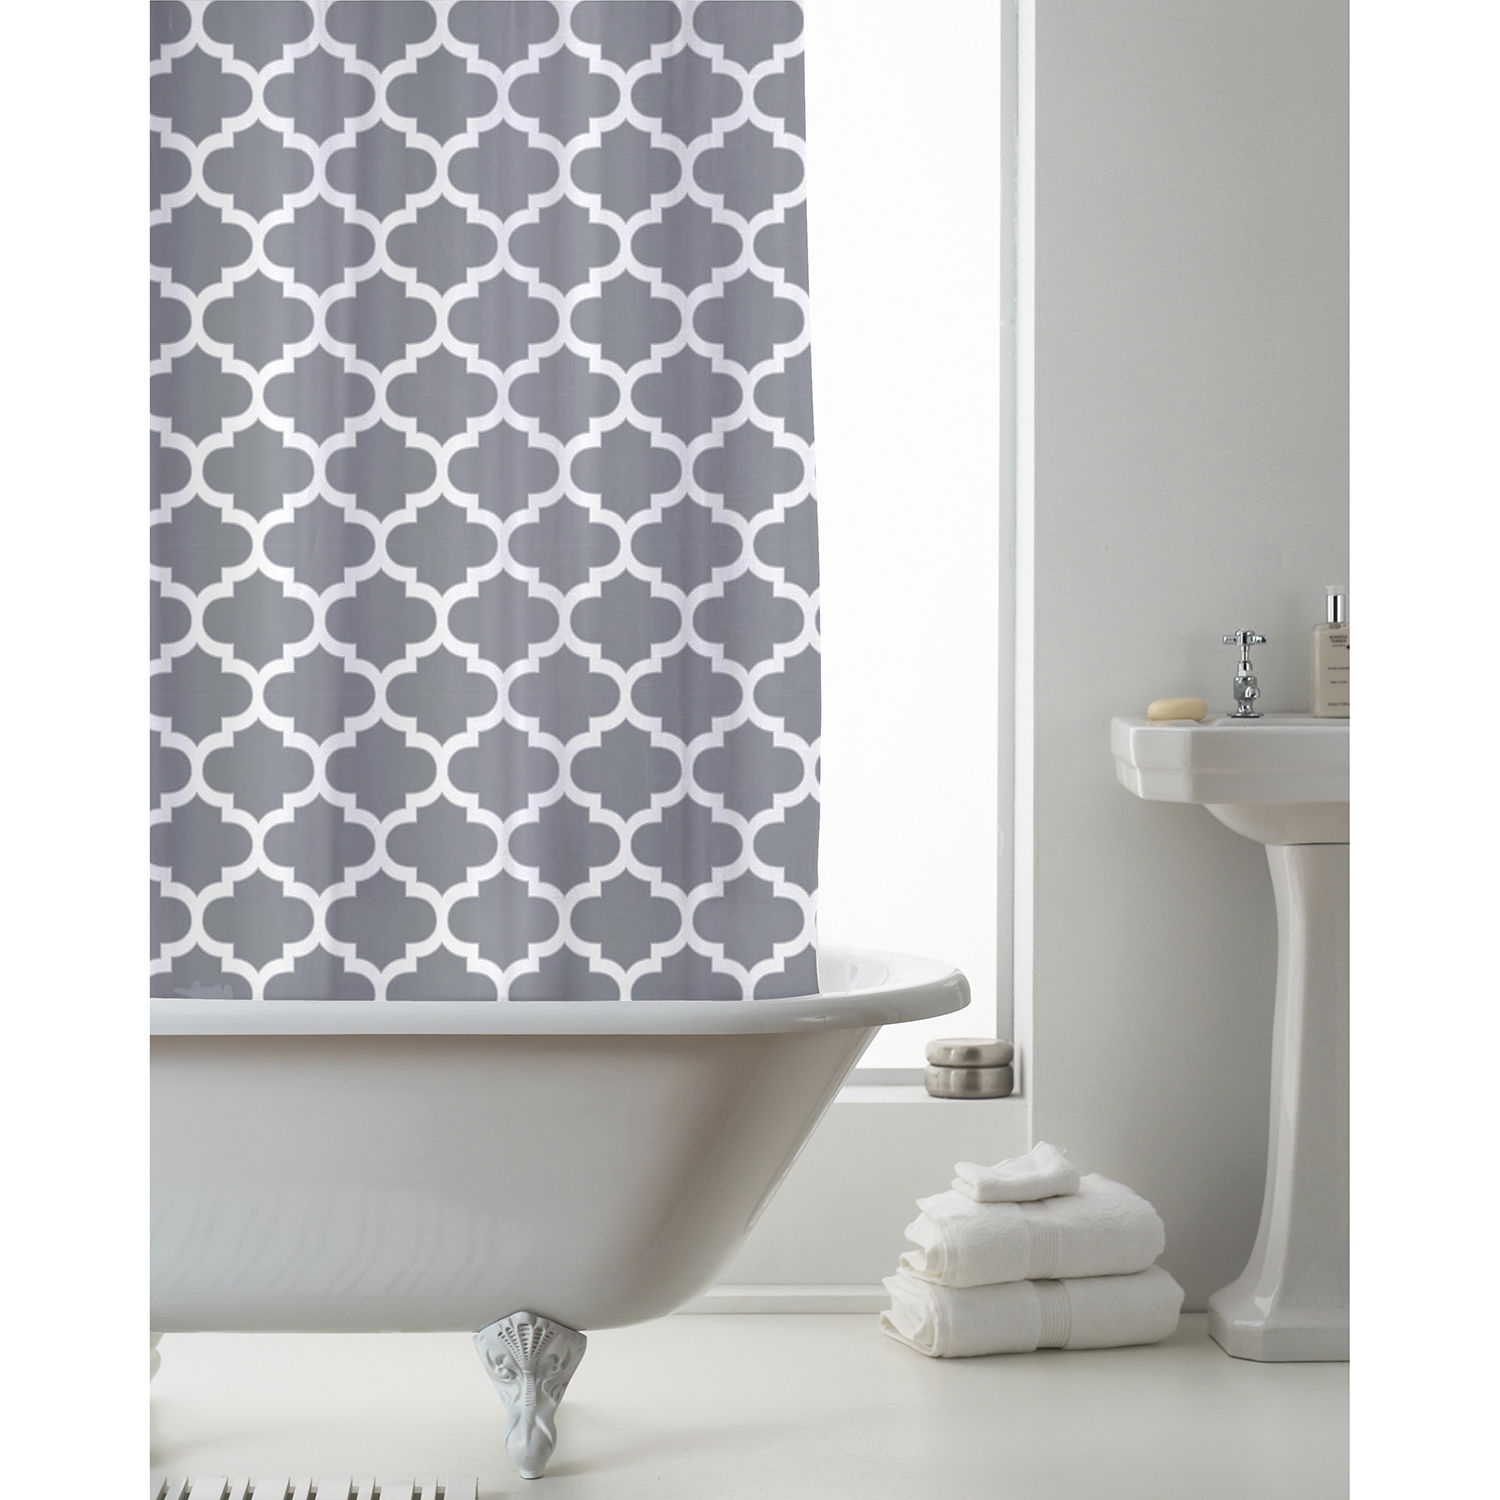 Moroccan Grey with Rings Shower Curtain